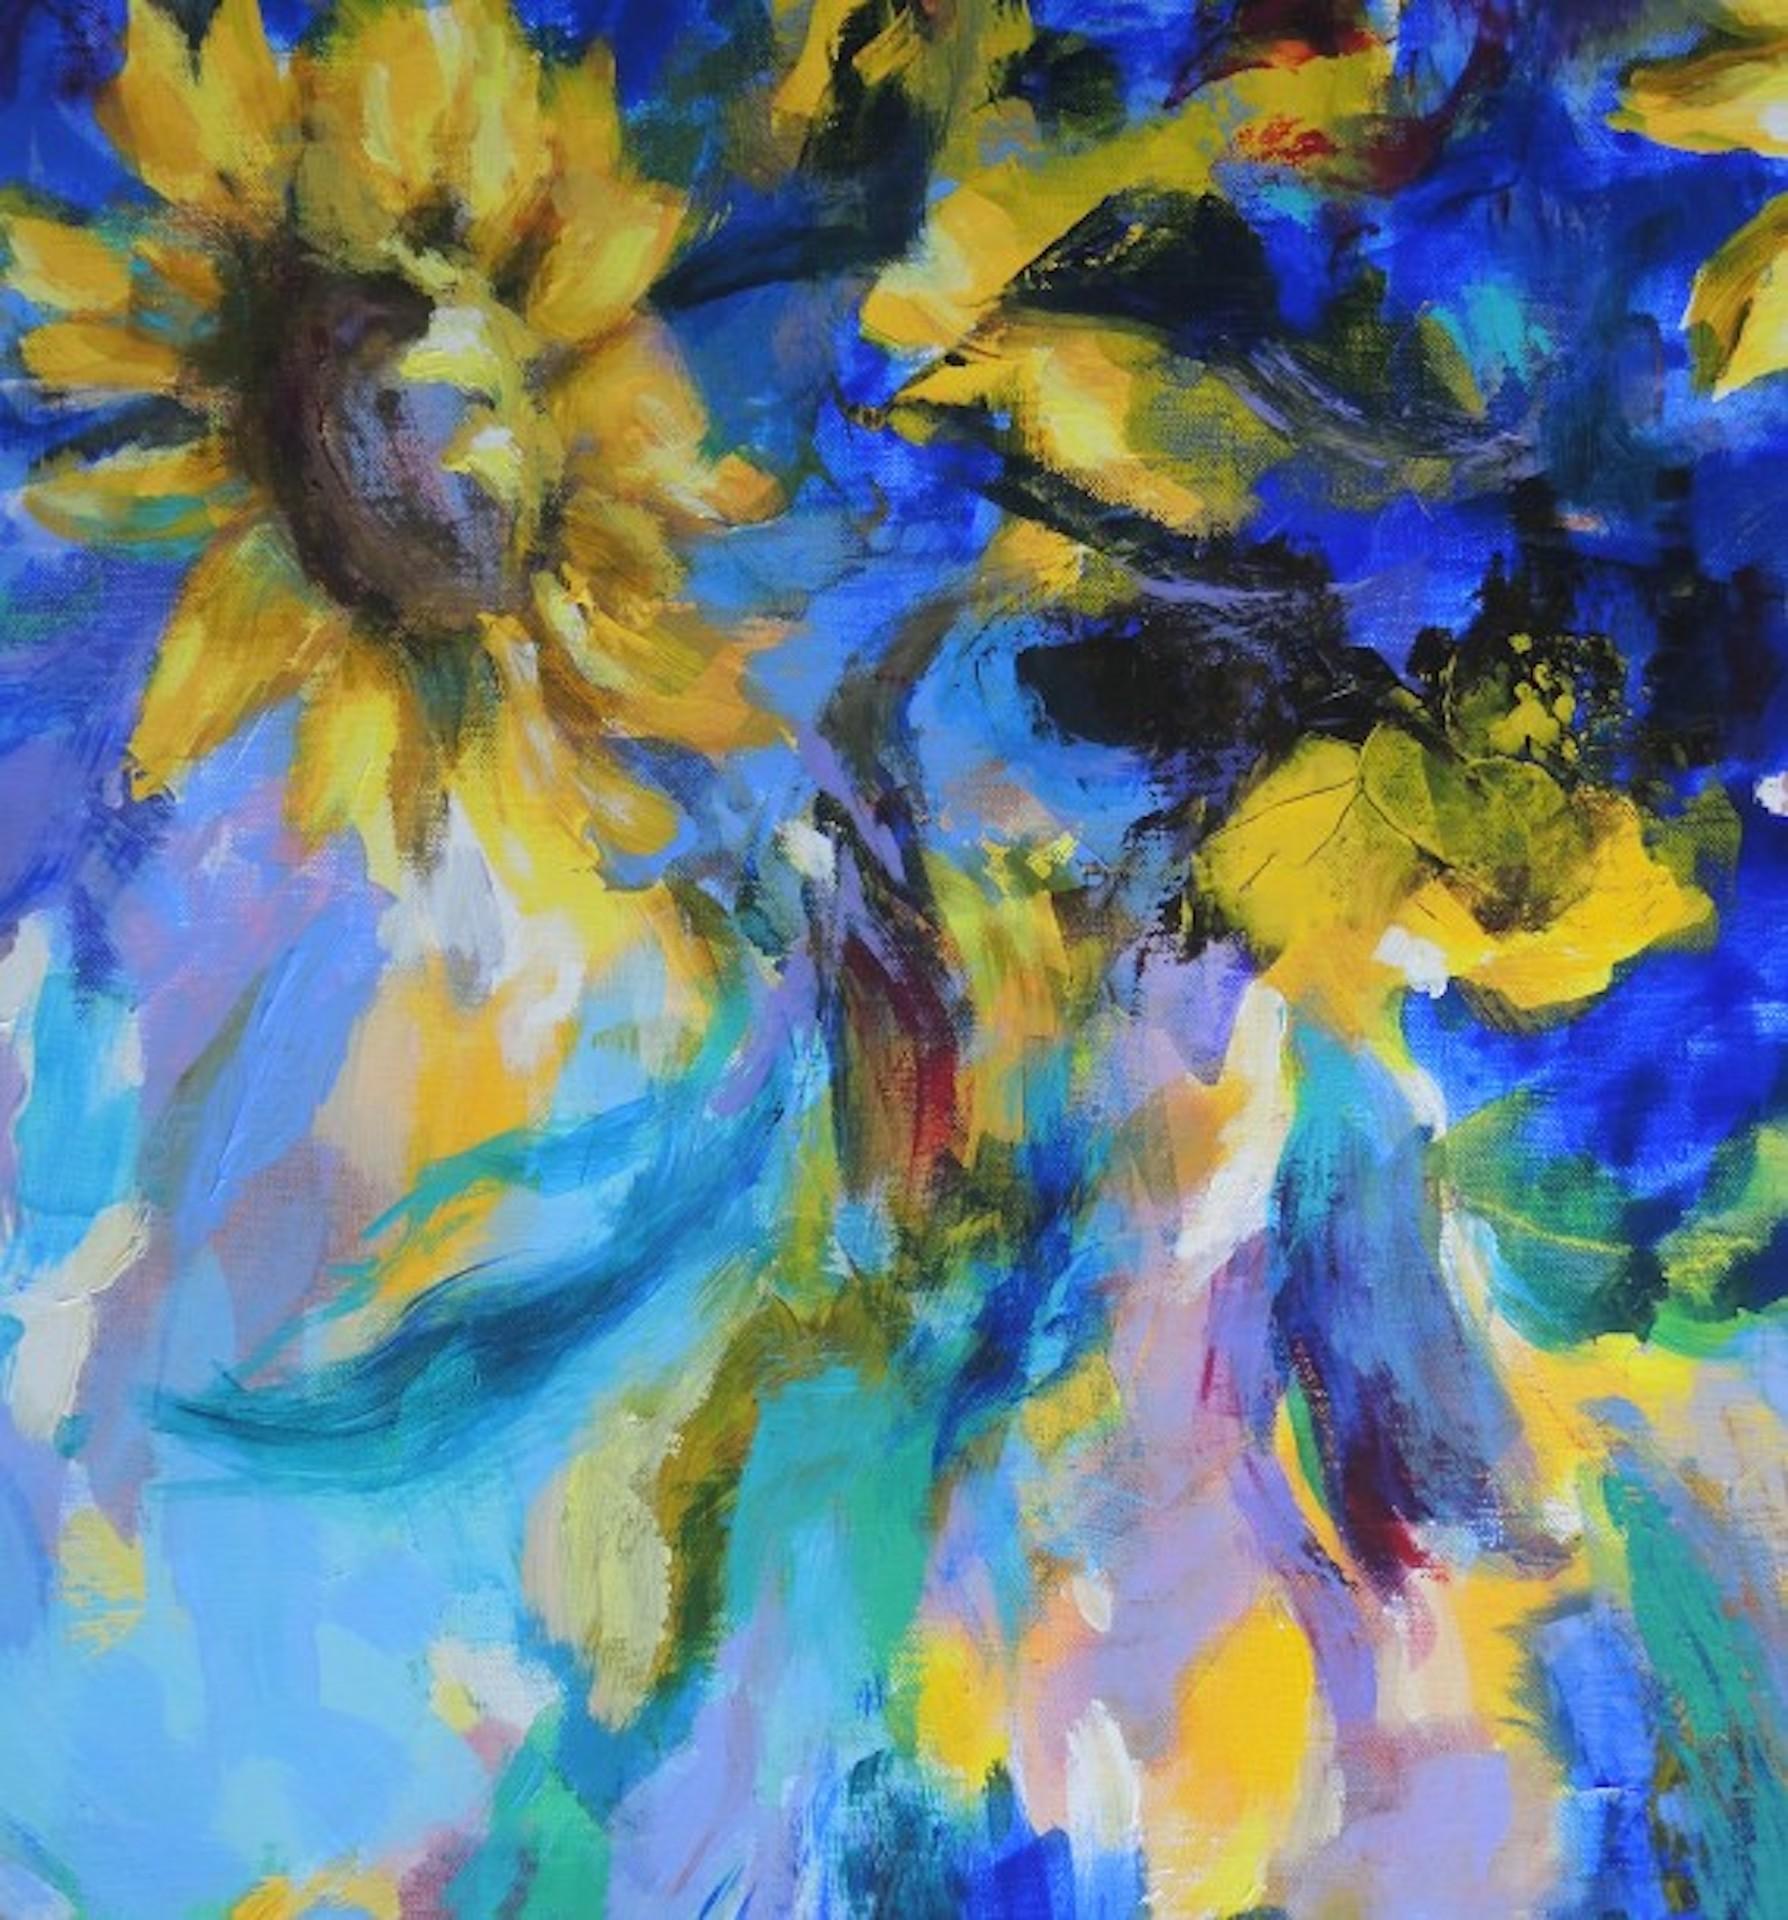 Sun flowers in blue, tribute to Vincent Van Gogh [2020]
Original
Flowers
Acrylic on canvas
Canvas Size: H:100 cm x W:80 cm x D:1,8cm
Sold Unframed
Please note that insitu images are purely an indication of how a piece may look

Mary Chaplin, ‘Sun